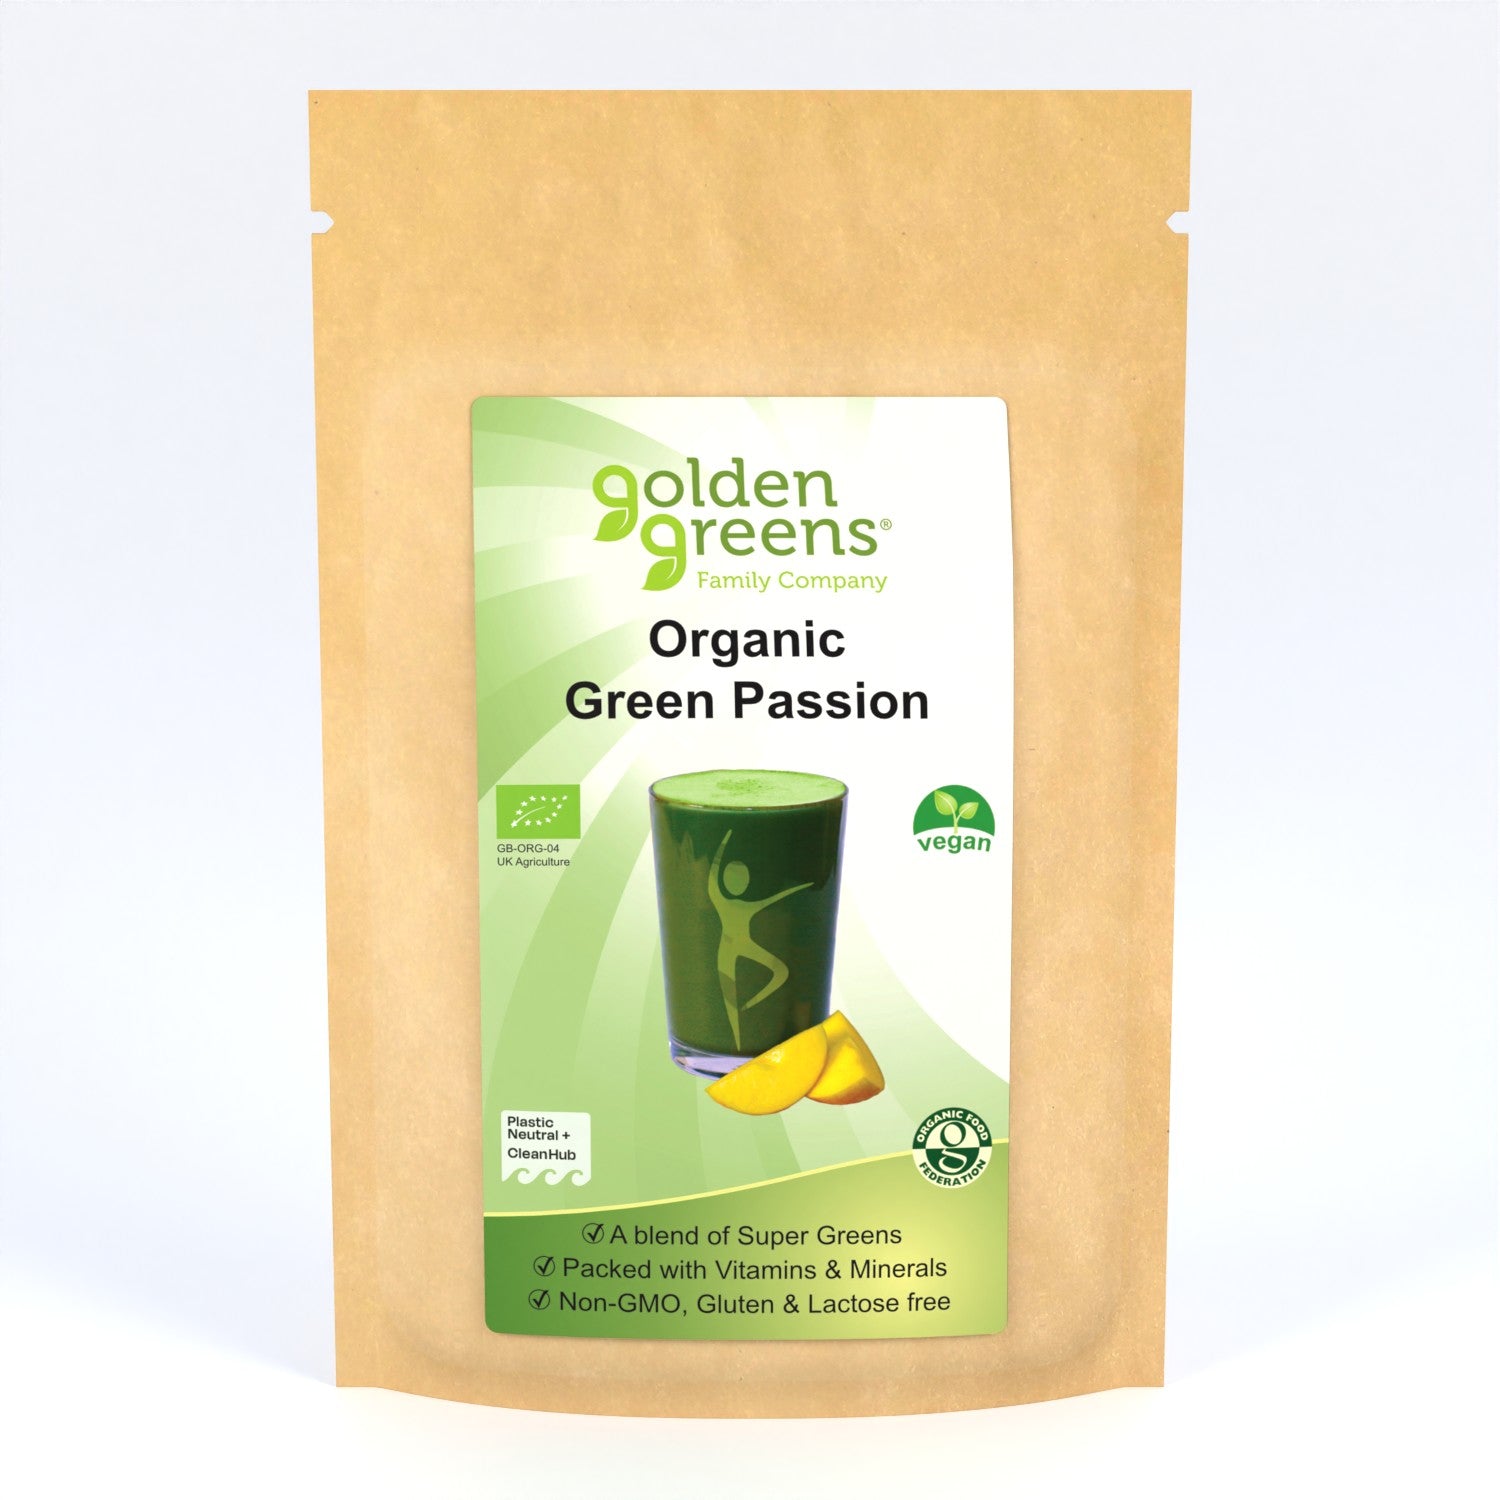 View Organic Green Passion SuperGreens information